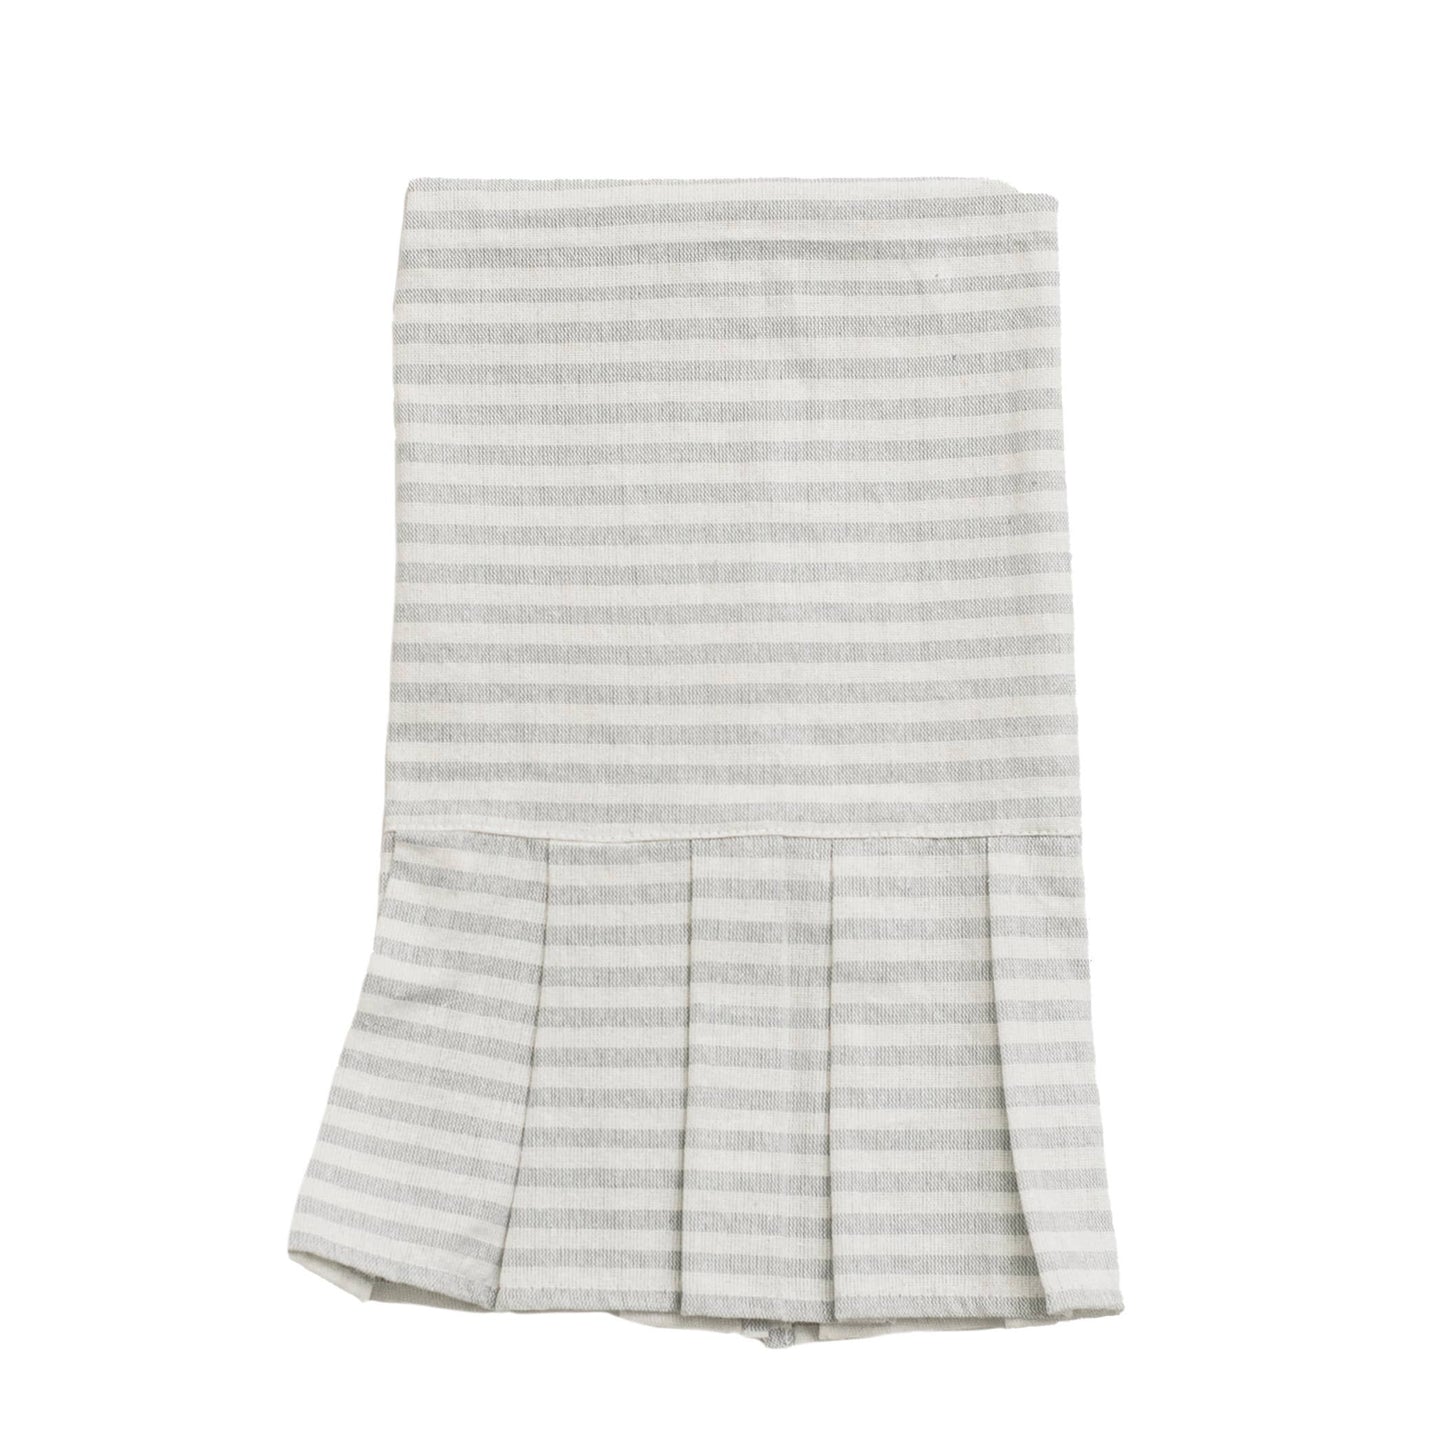 Sweet Water Decor - Striped Tea Towel with Ruffle - Cream with Grey Stripes